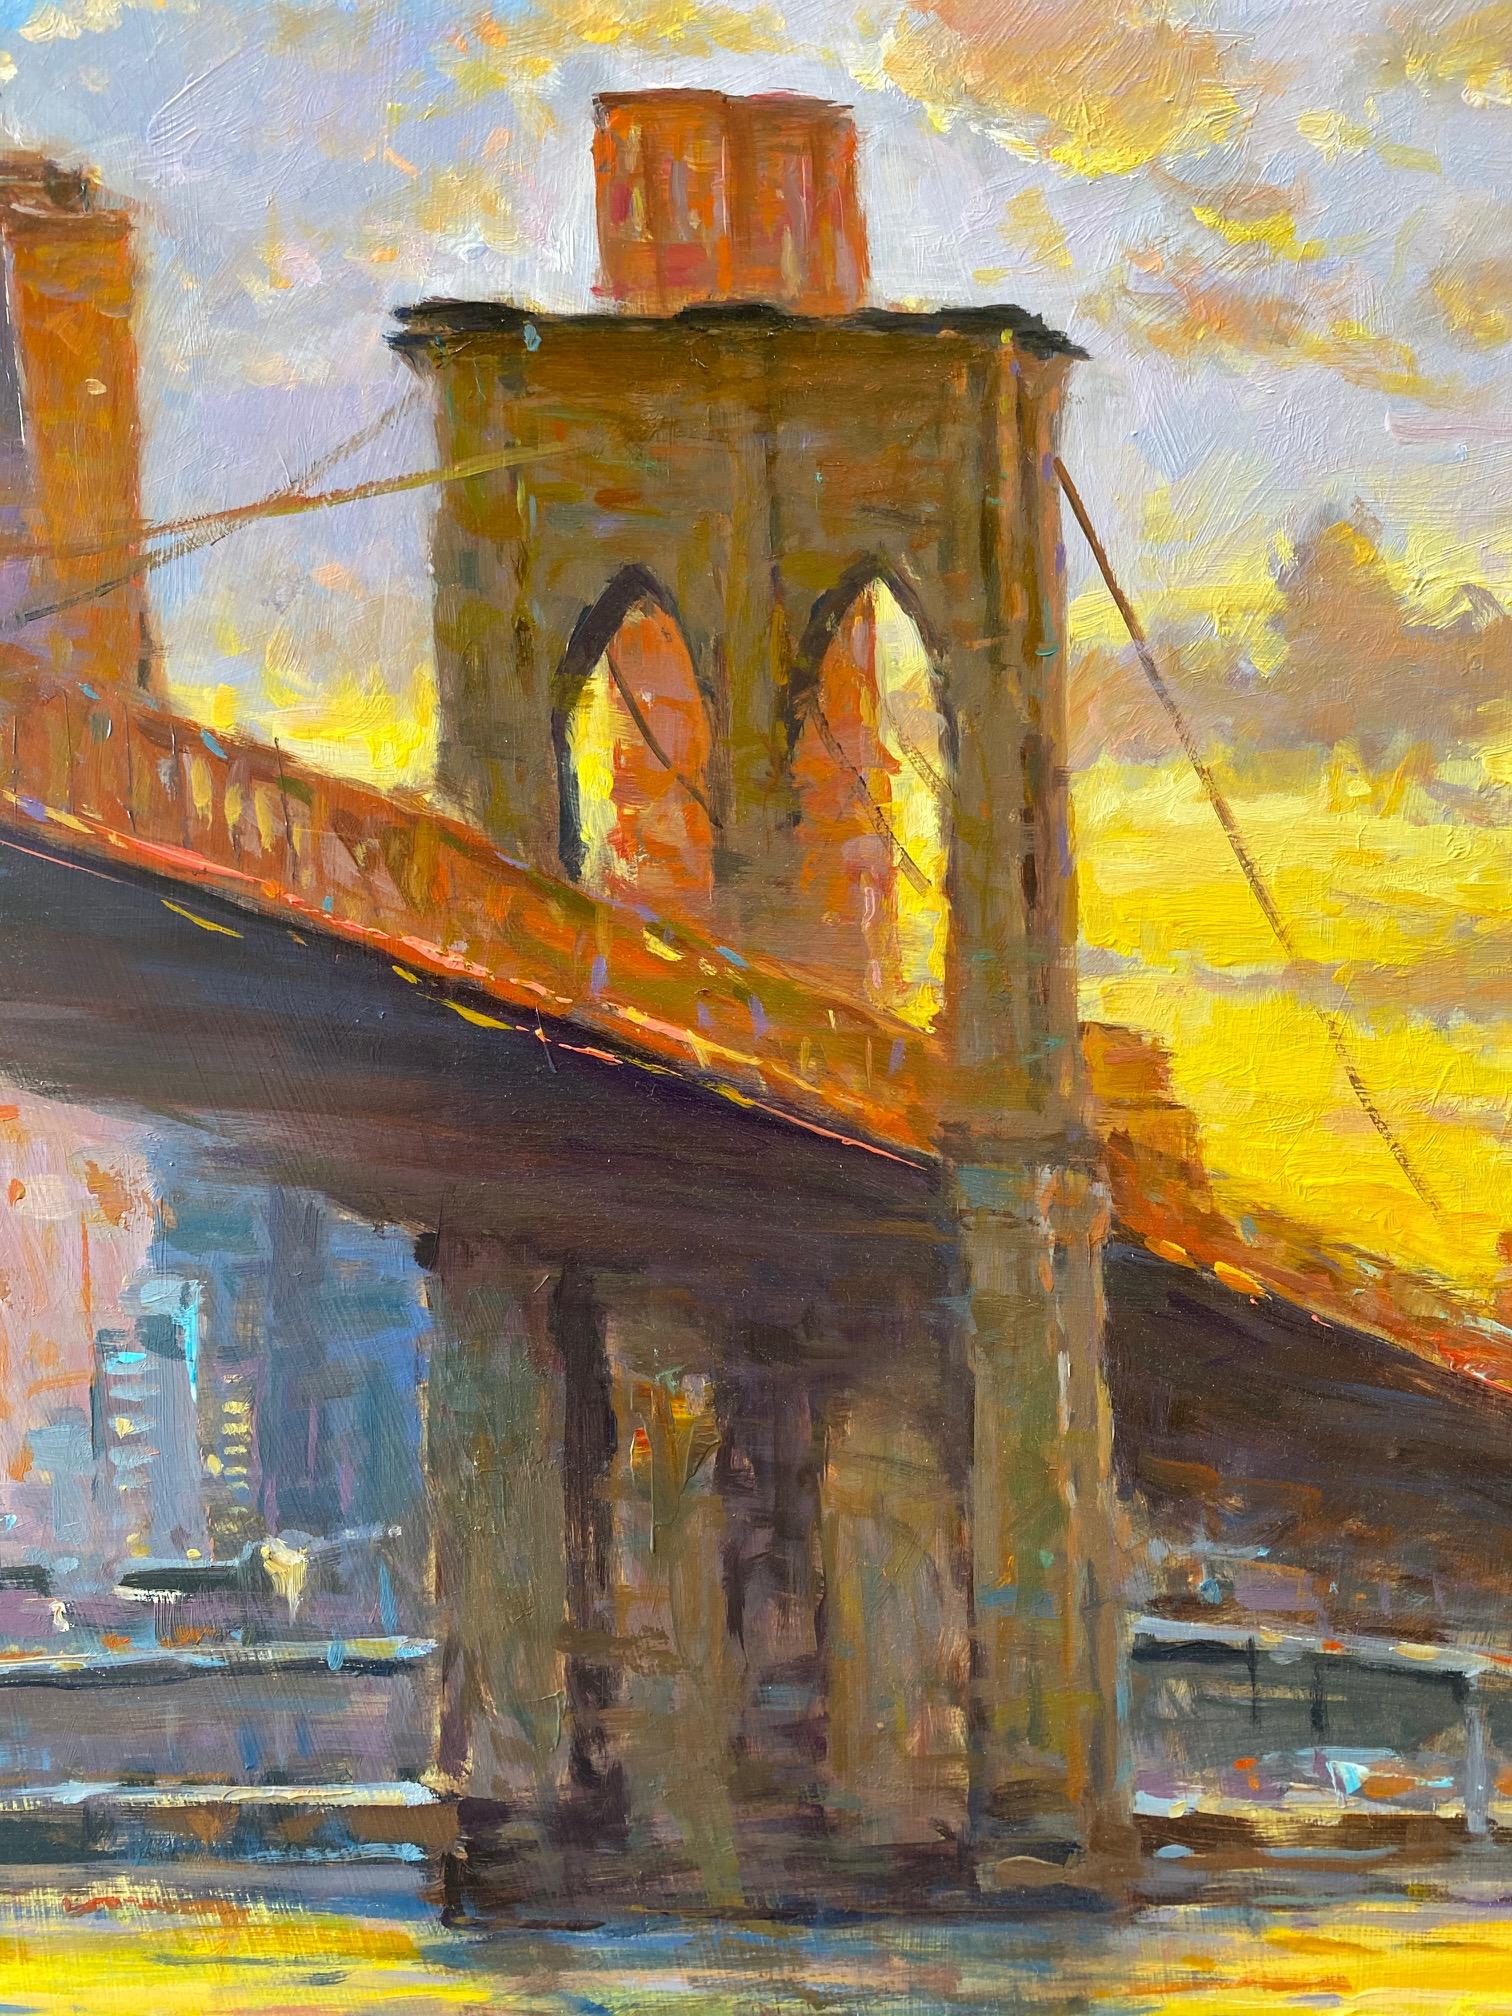 The glow of the sunset at the iconic Brooklyn Bridge of NYC radiates out upon the Freedom Tower and the East River. As the renaissance of Brooklyn, New York is blooming, the connection that the Brooklyn Bridge provides between Brooklyn and the